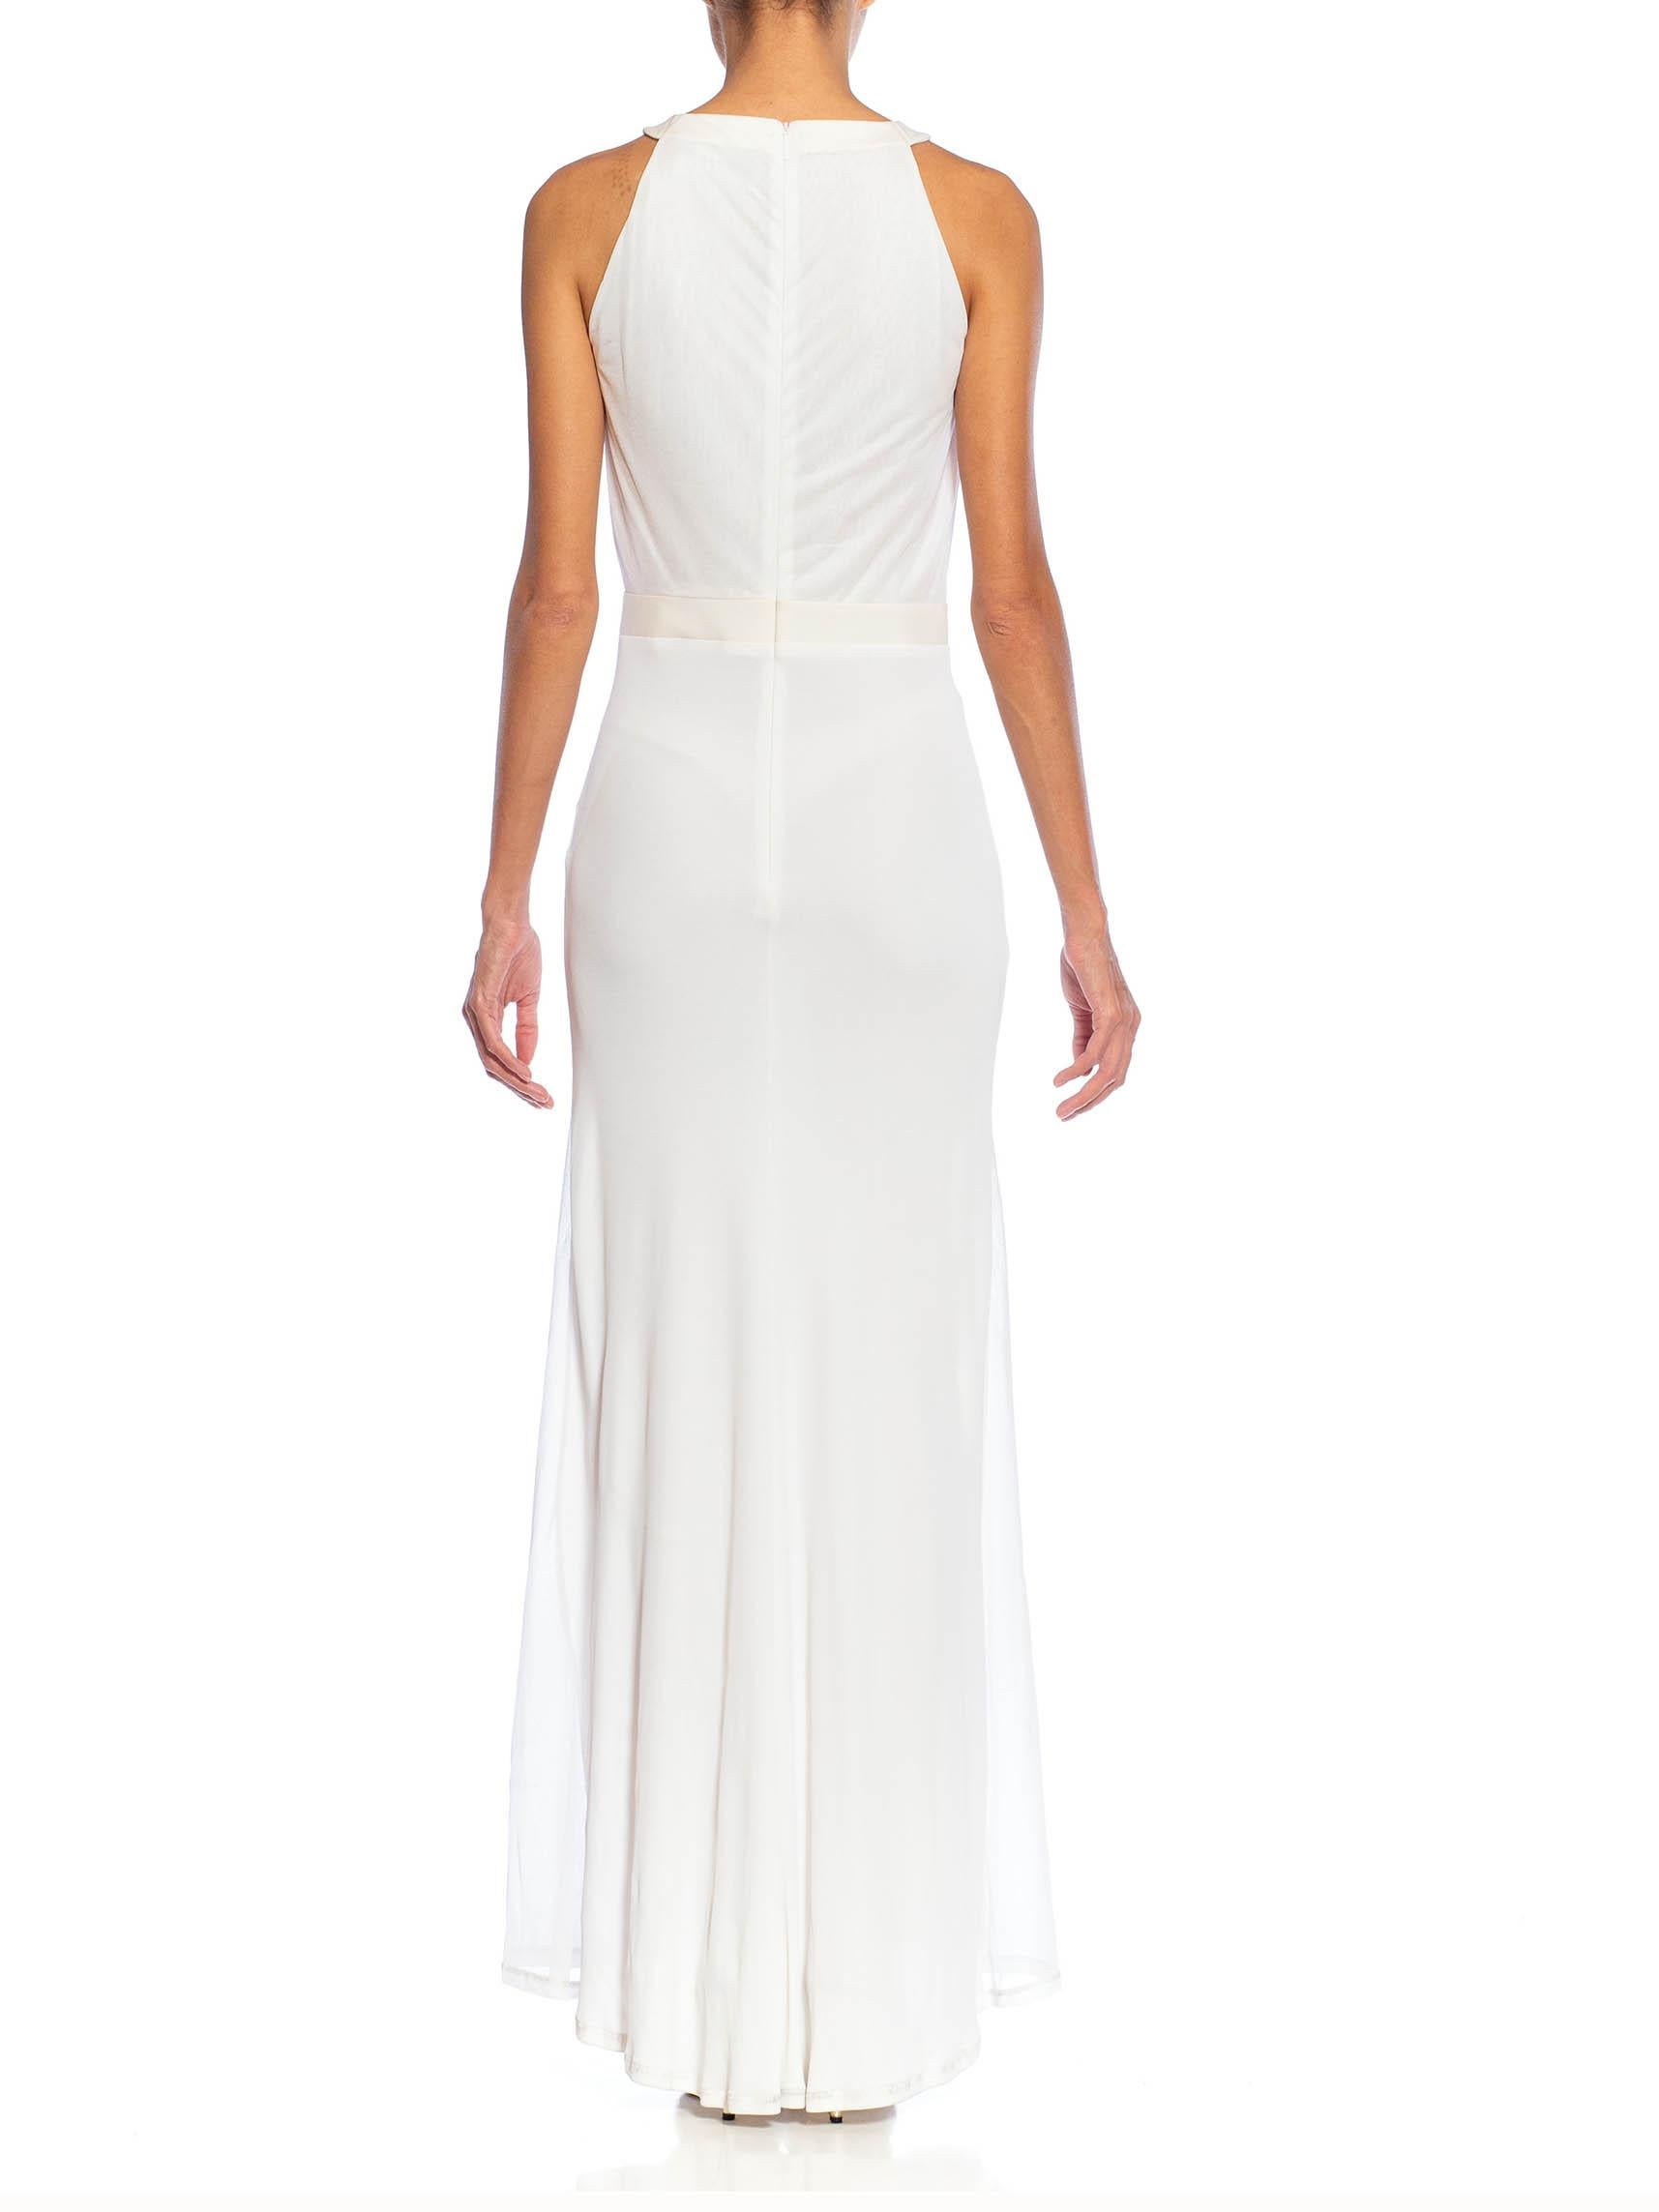 2000S EMILIO PUCCI White Viscose Blend Jersey Gown For Sale 2